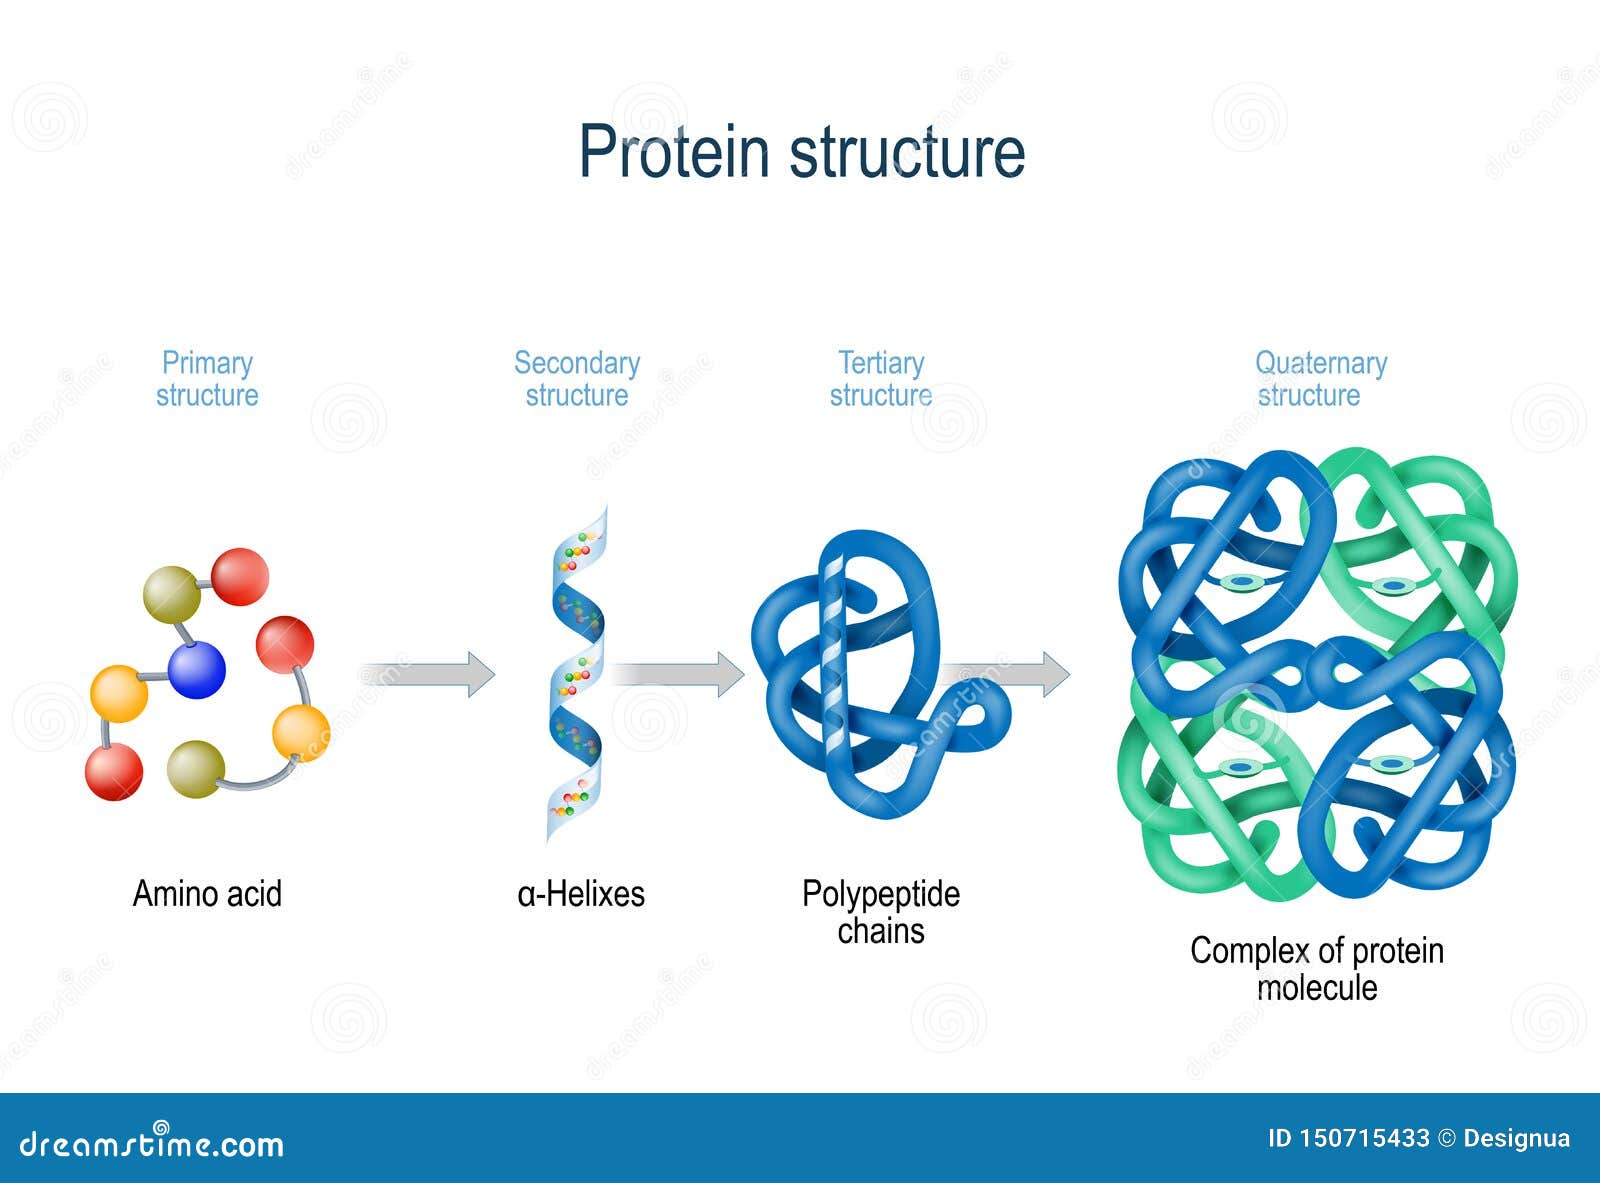 Structure protein primary of What stabilizes